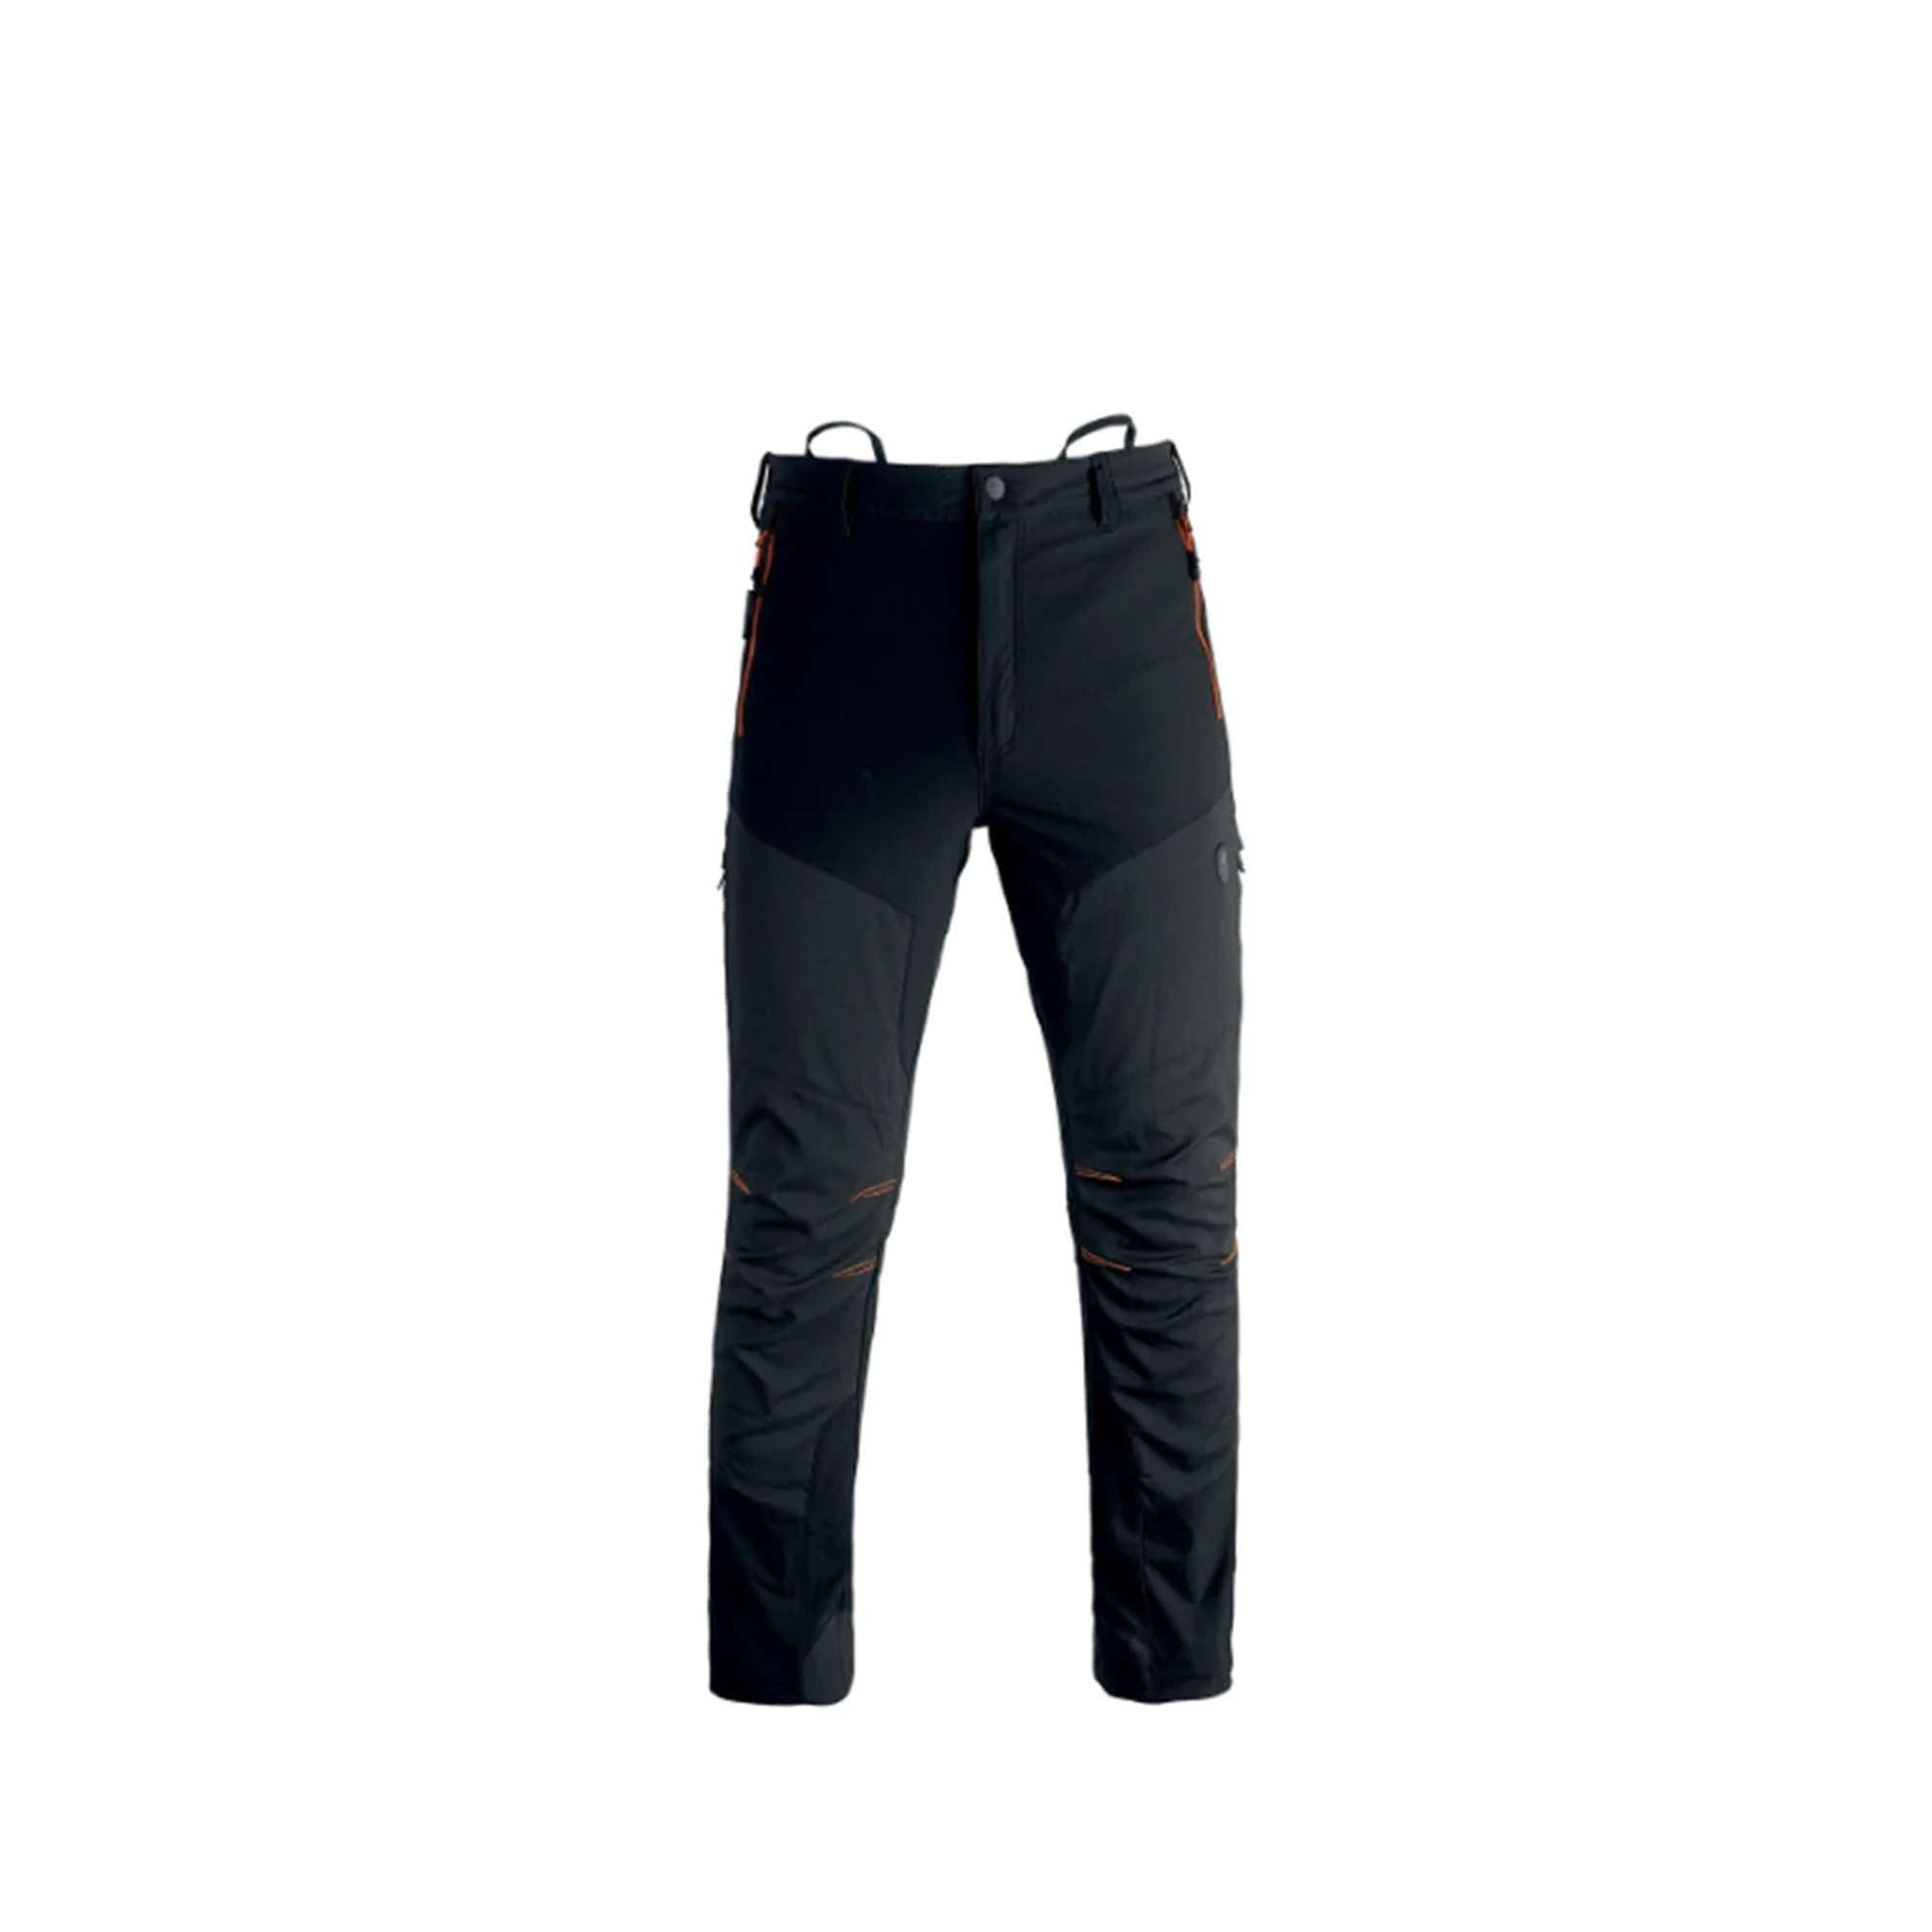 Work pants, stretch fabric and water repellent, Black color - Kapriol